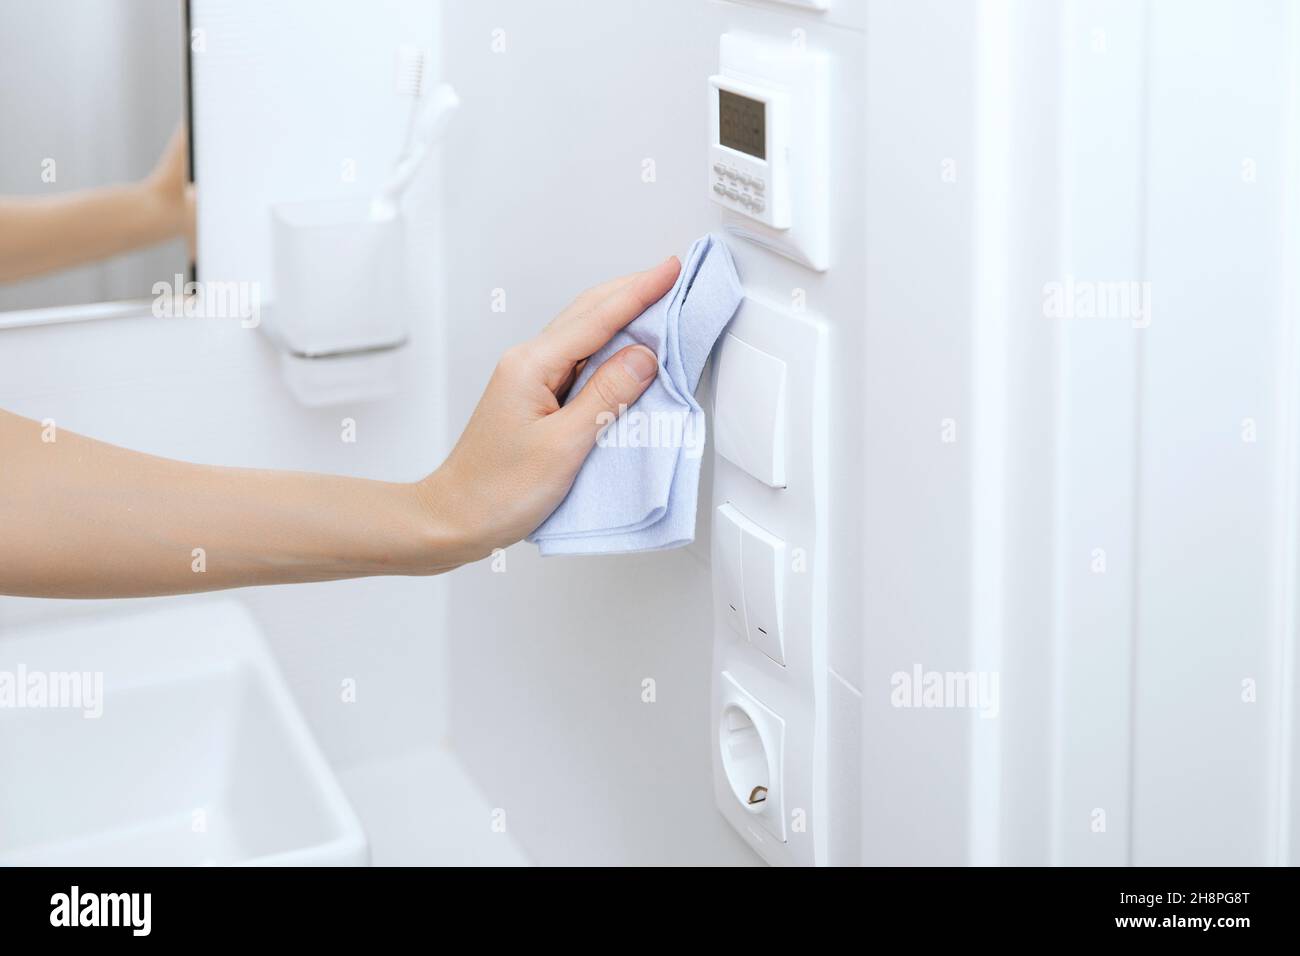 Cleaning switches and sockets with a microfiber cloth. Sanitize surfaces prevention in hospital and public spaces against corona virus. Woman hand Stock Photo